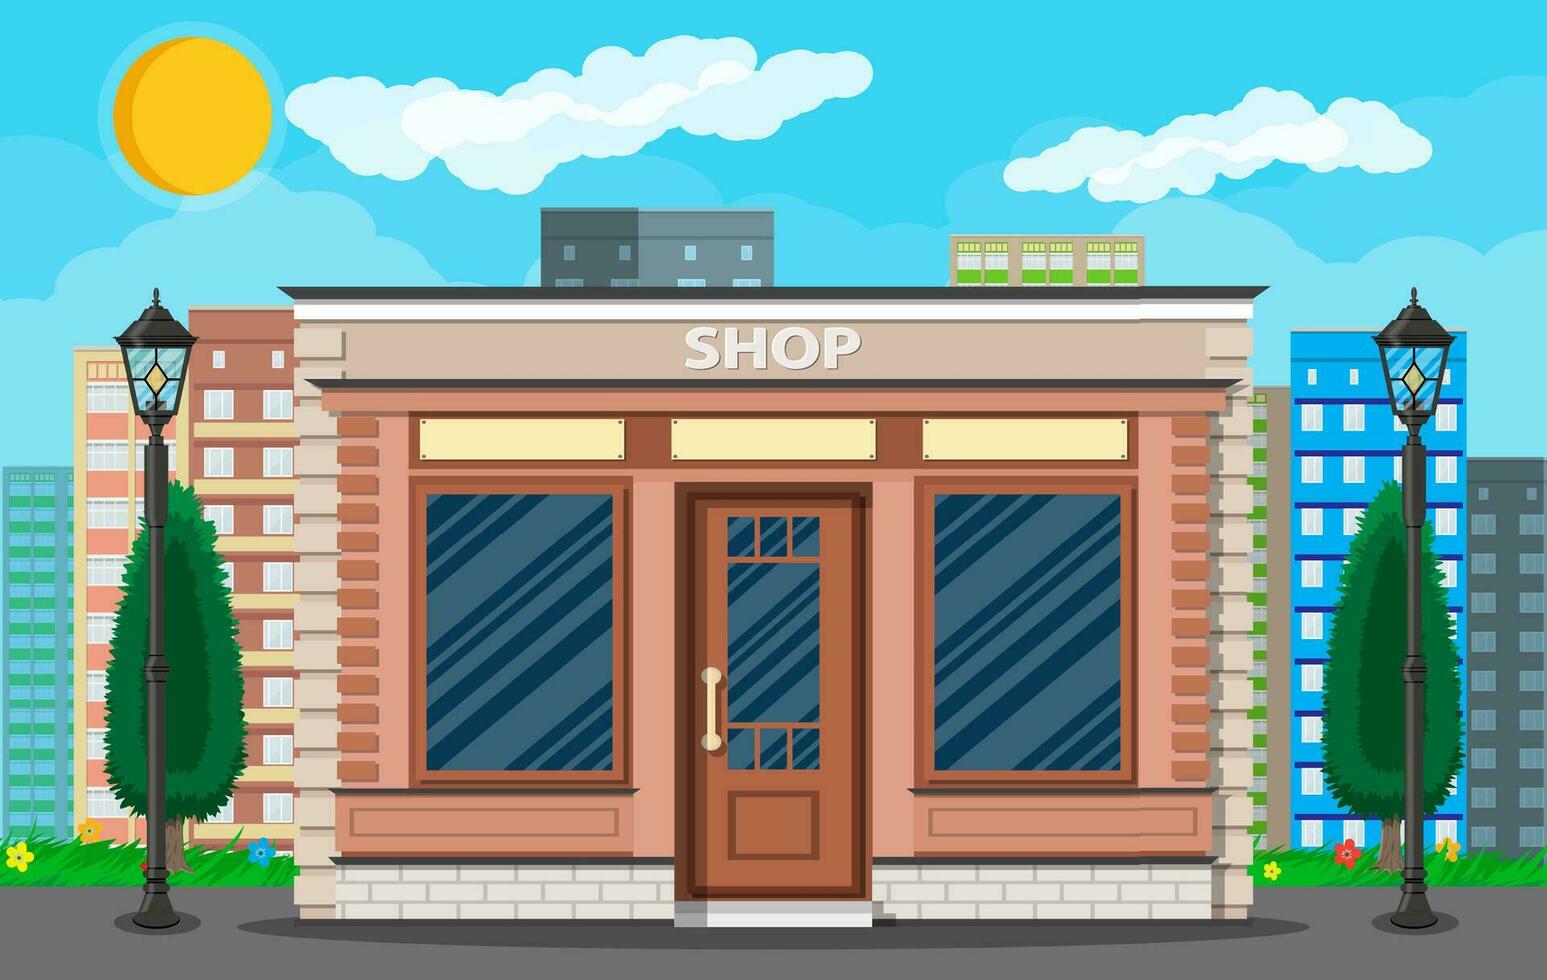 Generic shop exterior on the city street. Wooden and bricks material. Commercial, property. Cityscape, buildings, sun, clouds. Vector illustration in flat style